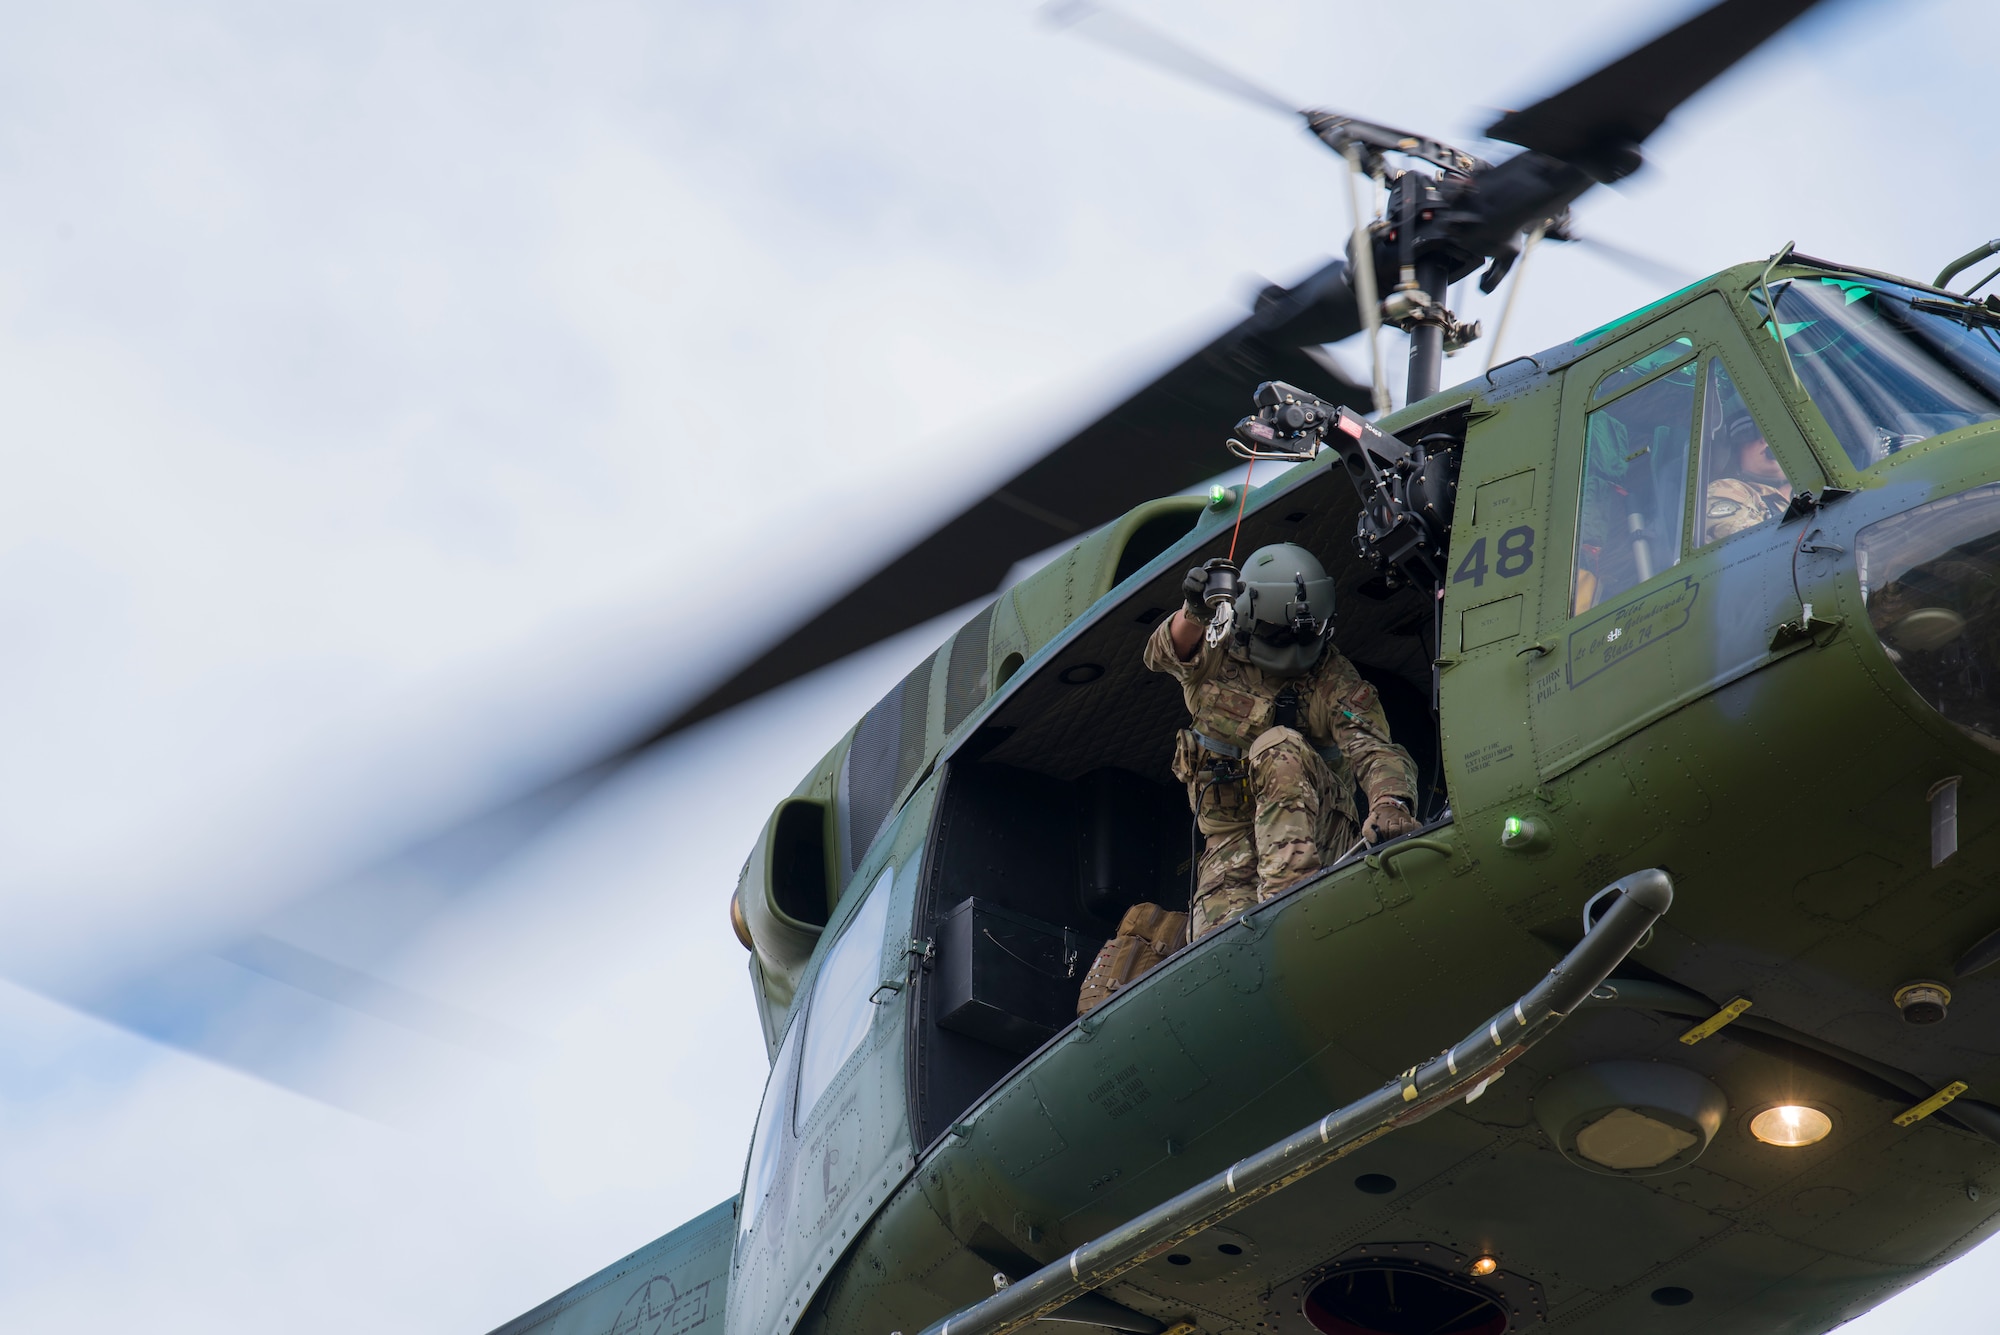 U.S. Air Force Tech. Sgt. Scott Grubaugh, 36th Rescue Squadron flight engineer, performs a medical evacuation demonstration prior to the commemoration ceremony of the 36th RQS reaching 700 saves at Fairchild Air Force Base, Washington, Sept. 20, 2019. The 36th RQS began its operations in 1971, providing support to Survival, Evasion, Resistance and Escape specialists as well as civilian emergency search and rescue coverage of the Inland Northwest. (U.S. Air Force photo by Airman 1st Class Lawrence Sena)